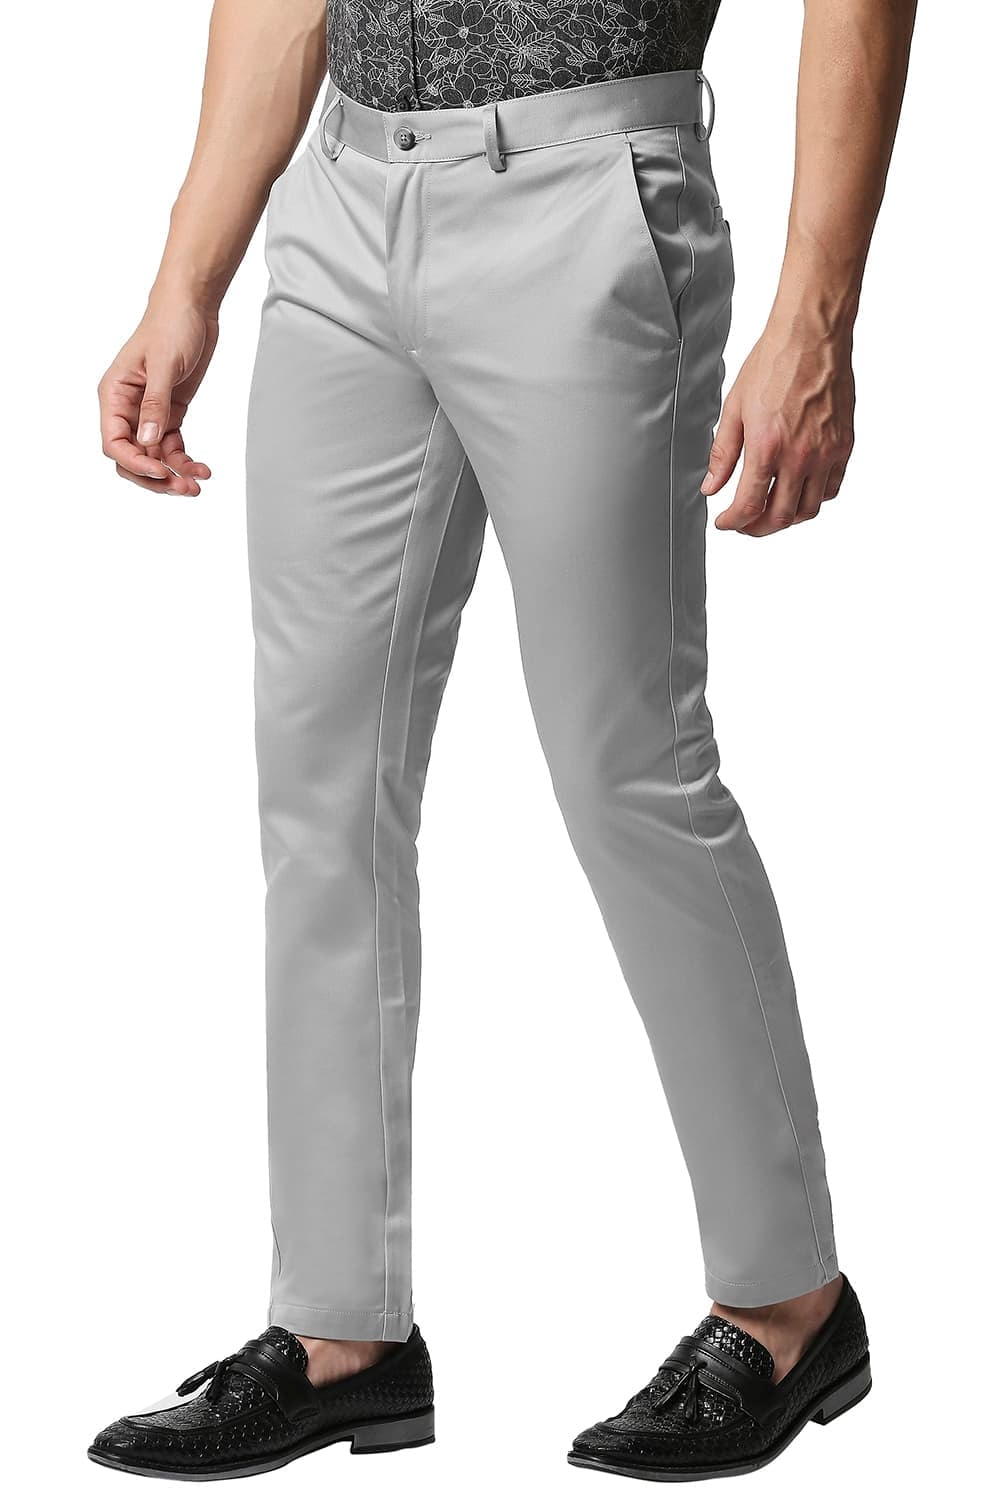 Basics Tapered Fit Grey Satin Trousers